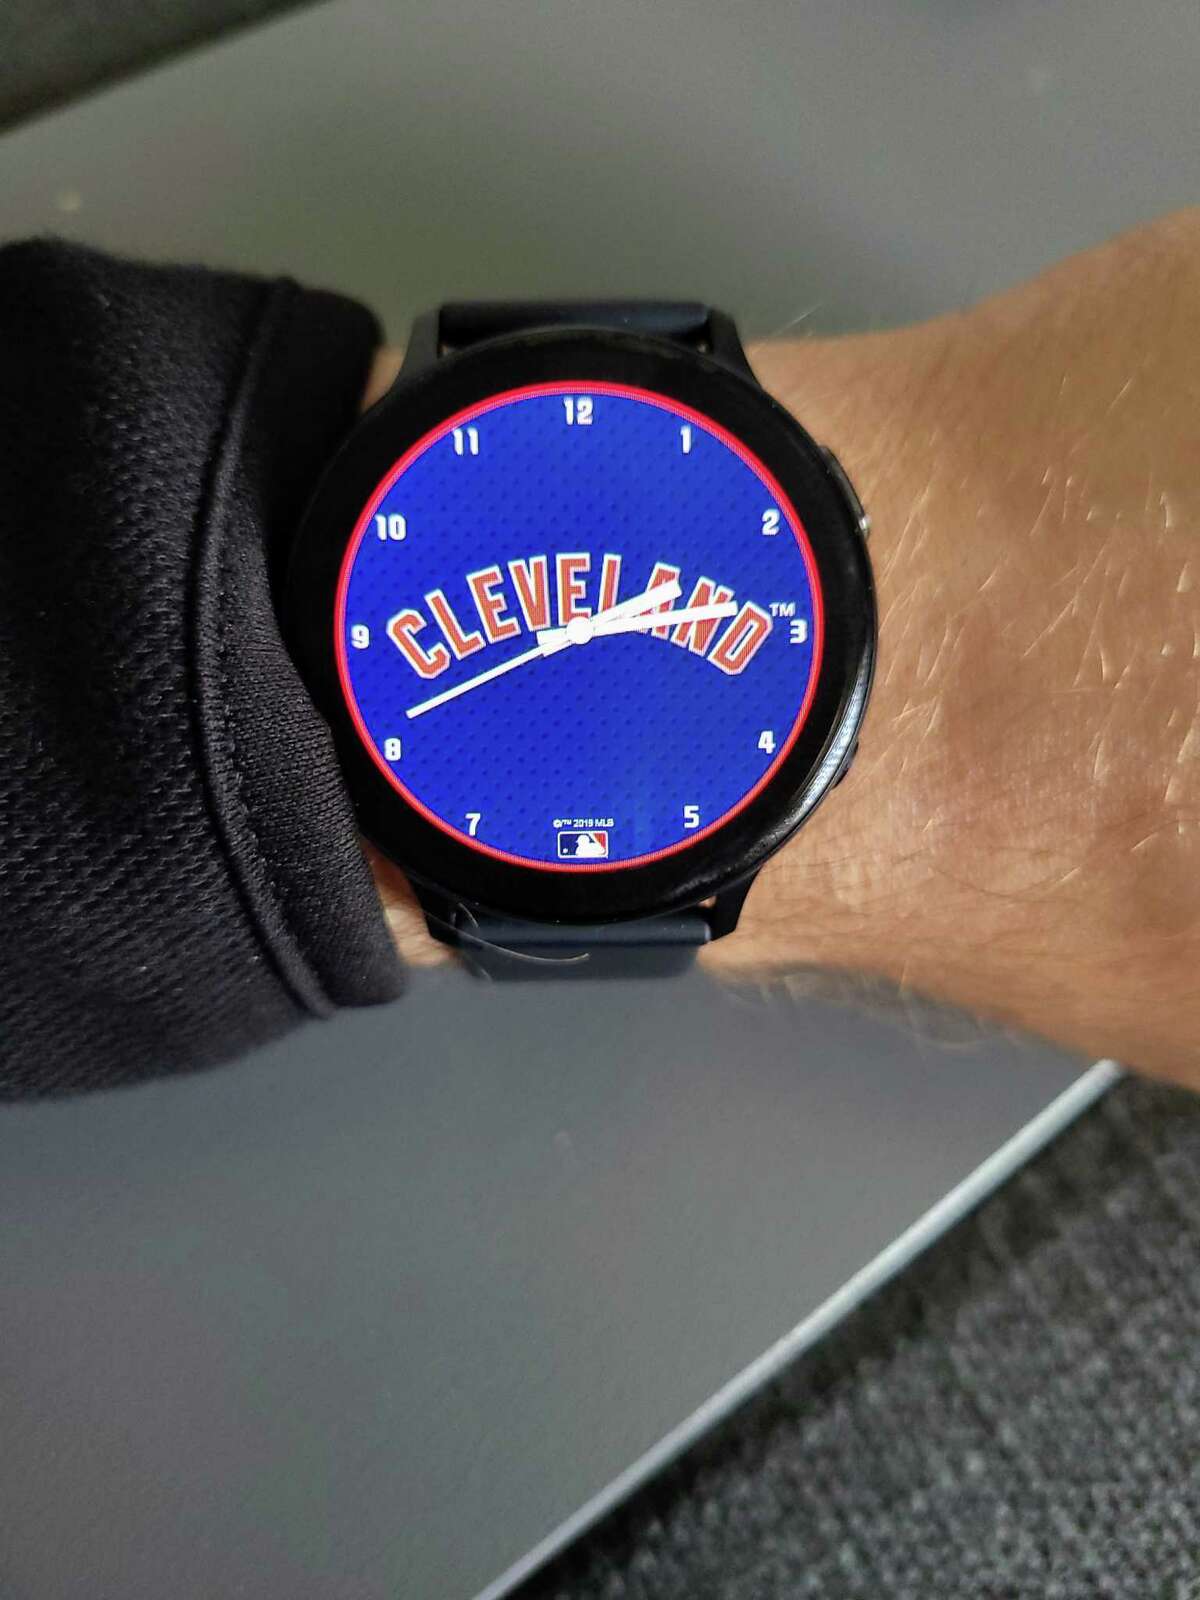 A wide array of faces are available for the Samsung Galaxy Watch Active 2 including sports themes such as this Cleveland Indians option.